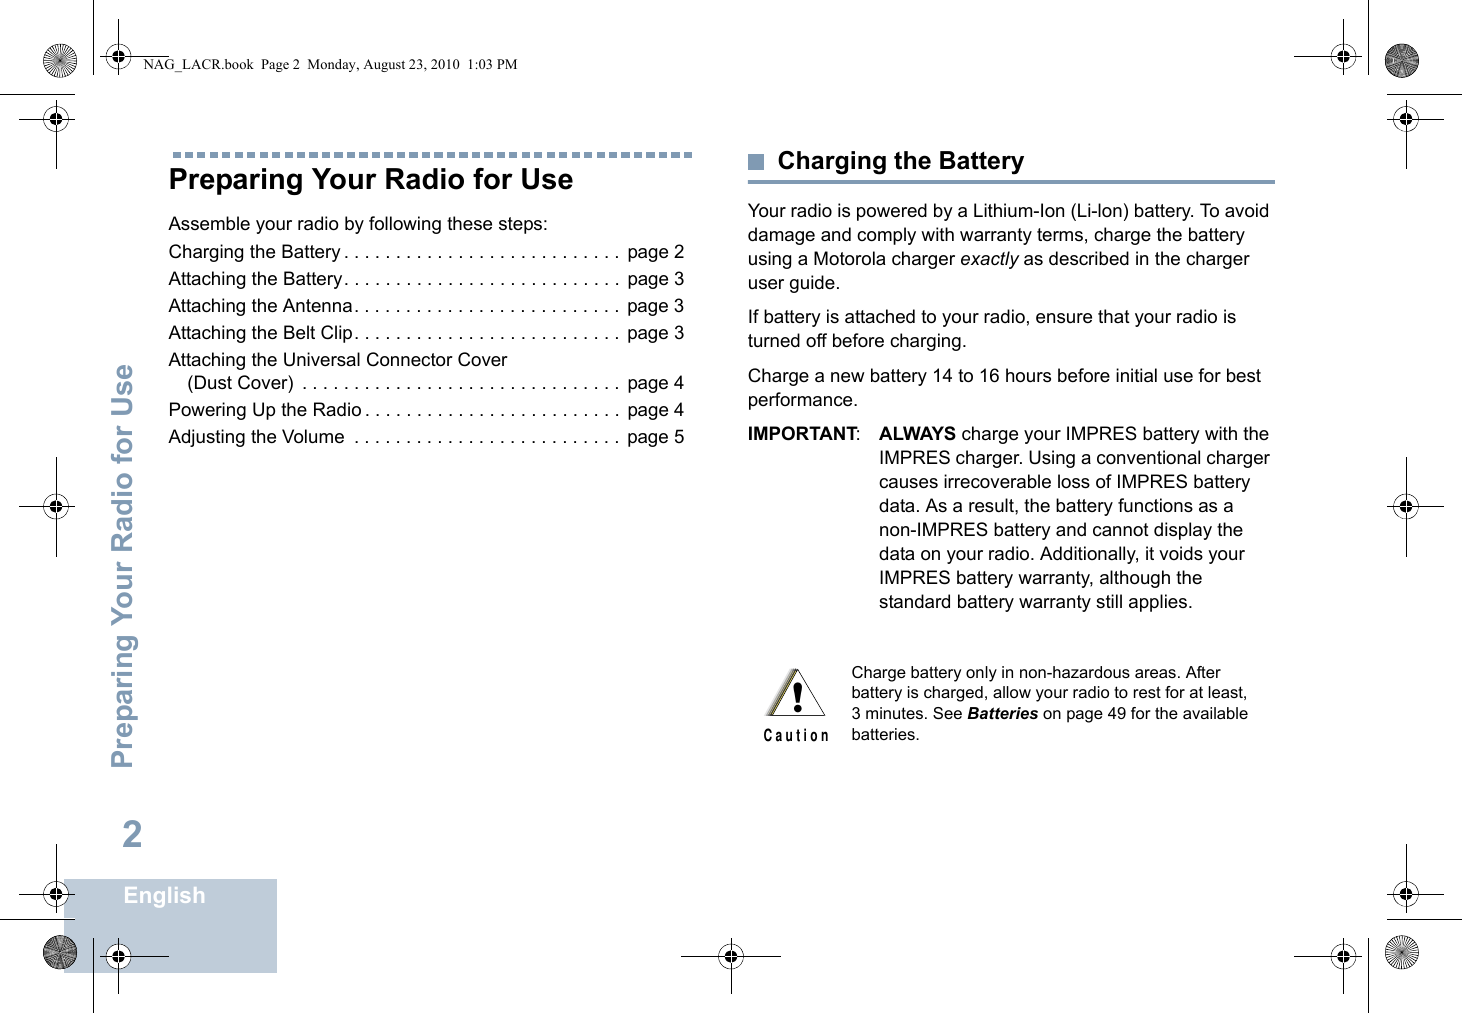 Preparing Your Radio for UseEnglish2Preparing Your Radio for UseAssemble your radio by following these steps:Charging the Battery . . . . . . . . . . . . . . . . . . . . . . . . . . .  page 2Attaching the Battery. . . . . . . . . . . . . . . . . . . . . . . . . . .  page 3Attaching the Antenna. . . . . . . . . . . . . . . . . . . . . . . . . .  page 3Attaching the Belt Clip. . . . . . . . . . . . . . . . . . . . . . . . . .  page 3Attaching the Universal Connector Cover (Dust Cover)  . . . . . . . . . . . . . . . . . . . . . . . . . . . . . . .  page 4Powering Up the Radio . . . . . . . . . . . . . . . . . . . . . . . . .  page 4Adjusting the Volume  . . . . . . . . . . . . . . . . . . . . . . . . . .  page 5Charging the BatteryYour radio is powered by a Lithium-Ion (Li-lon) battery. To avoid damage and comply with warranty terms, charge the battery using a Motorola charger exactly as described in the charger user guide.If battery is attached to your radio, ensure that your radio is turned off before charging.Charge a new battery 14 to 16 hours before initial use for best performance.IMPORTANT:ALWAYS charge your IMPRES battery with the IMPRES charger. Using a conventional charger causes irrecoverable loss of IMPRES battery data. As a result, the battery functions as a non-IMPRES battery and cannot display the data on your radio. Additionally, it voids your IMPRES battery warranty, although the standard battery warranty still applies.Charge battery only in non-hazardous areas. After battery is charged, allow your radio to rest for at least, 3 minutes. See Batteries on page 49 for the available batteries.!C a u t i o nNAG_LACR.book  Page 2  Monday, August 23, 2010  1:03 PM